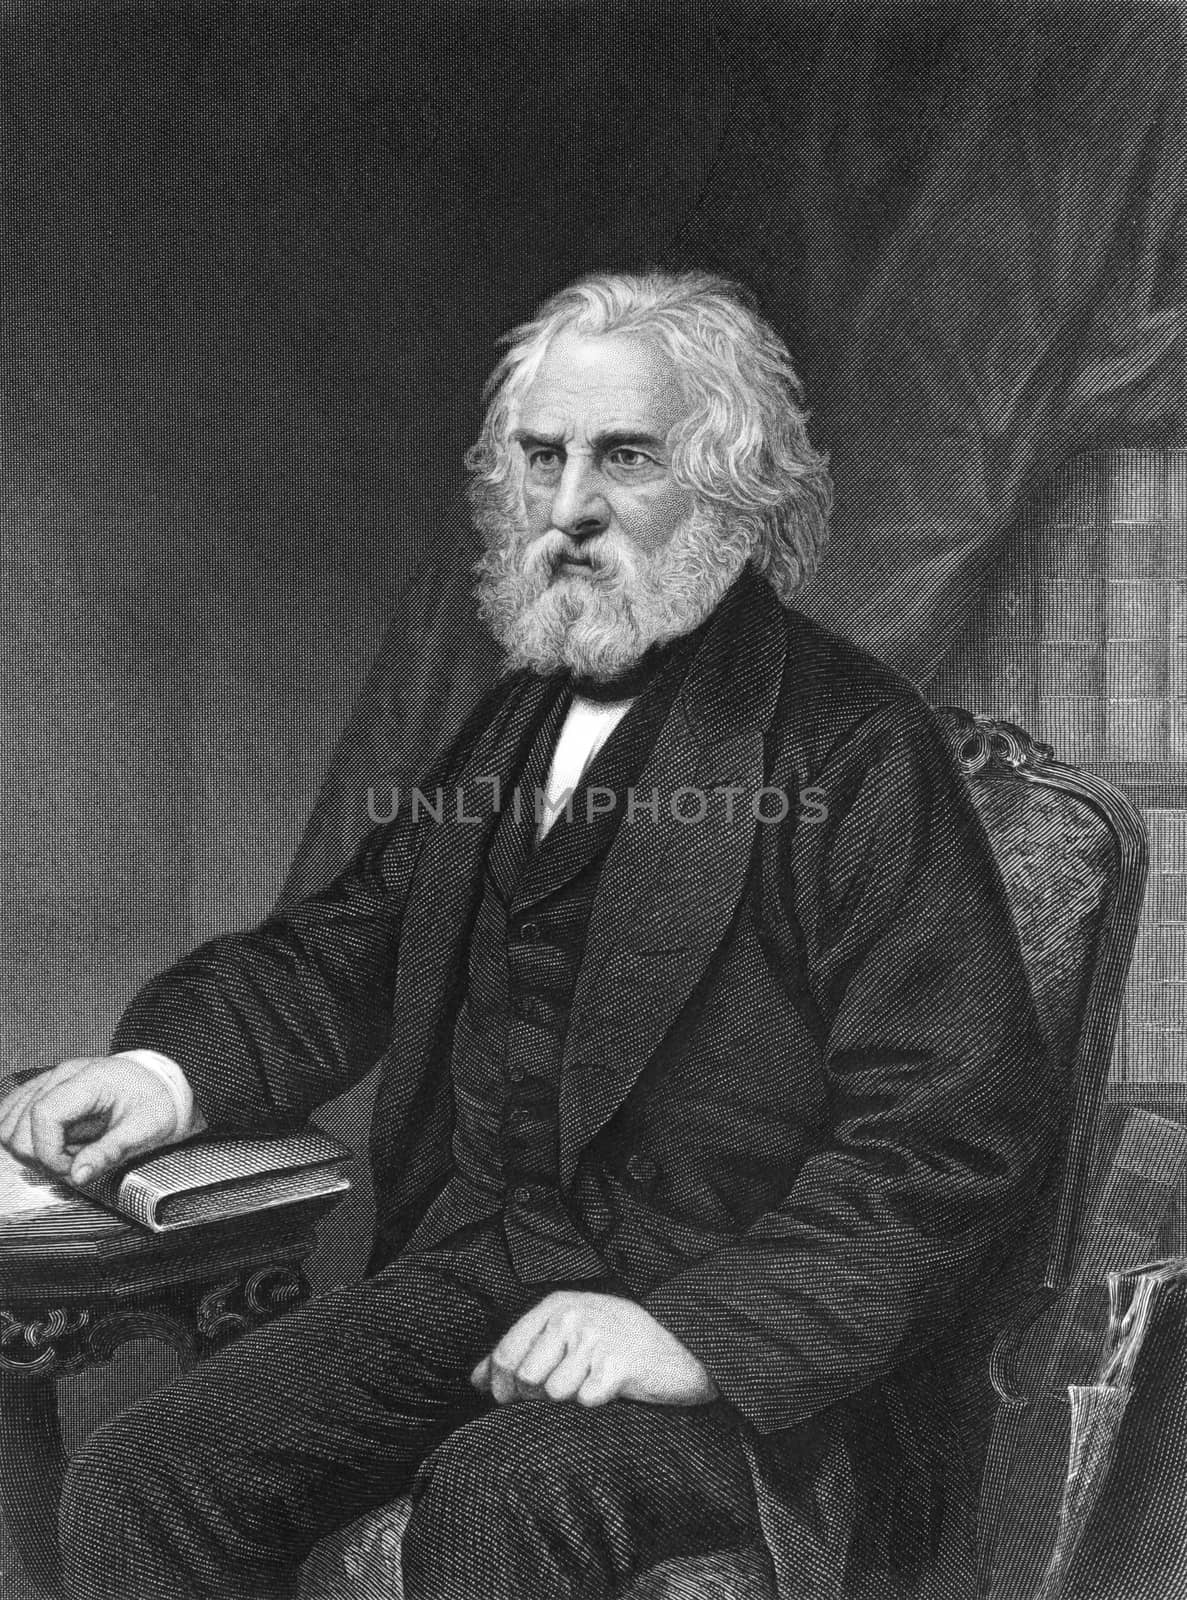 Henry Wadsworth Longfellow (1807-1882) on engraving from 1873. American poet and educator. Engraved by unknown artist and published in ''Portrait Gallery of Eminent Men and Women with Biographies'',USA,1873.